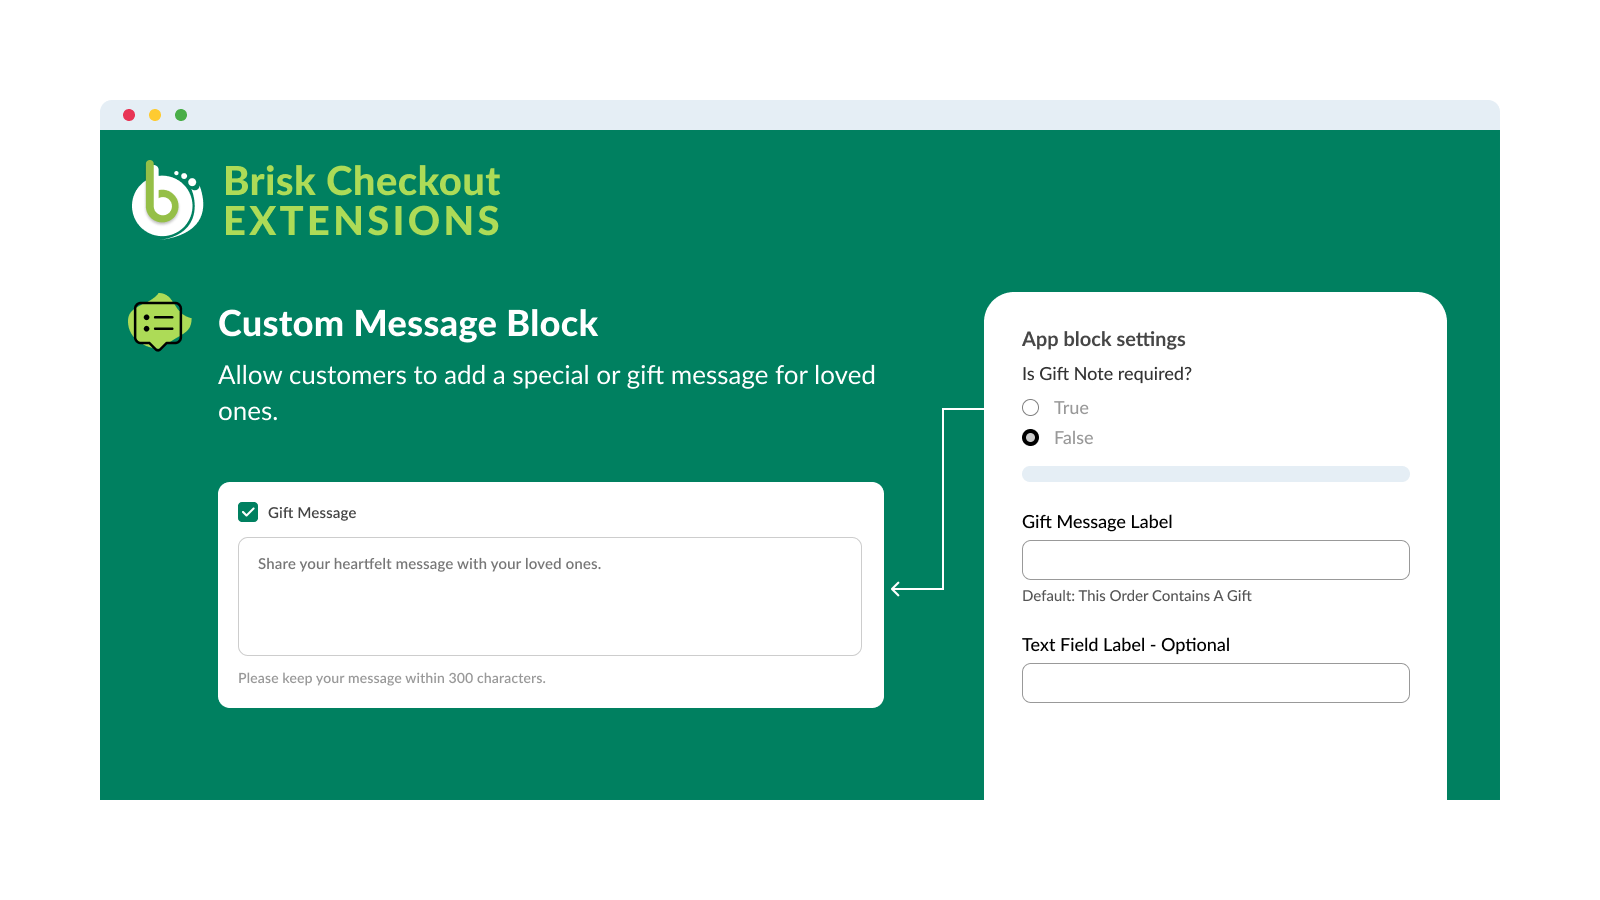 Brisk Checkout Extensions - Gift Message Block